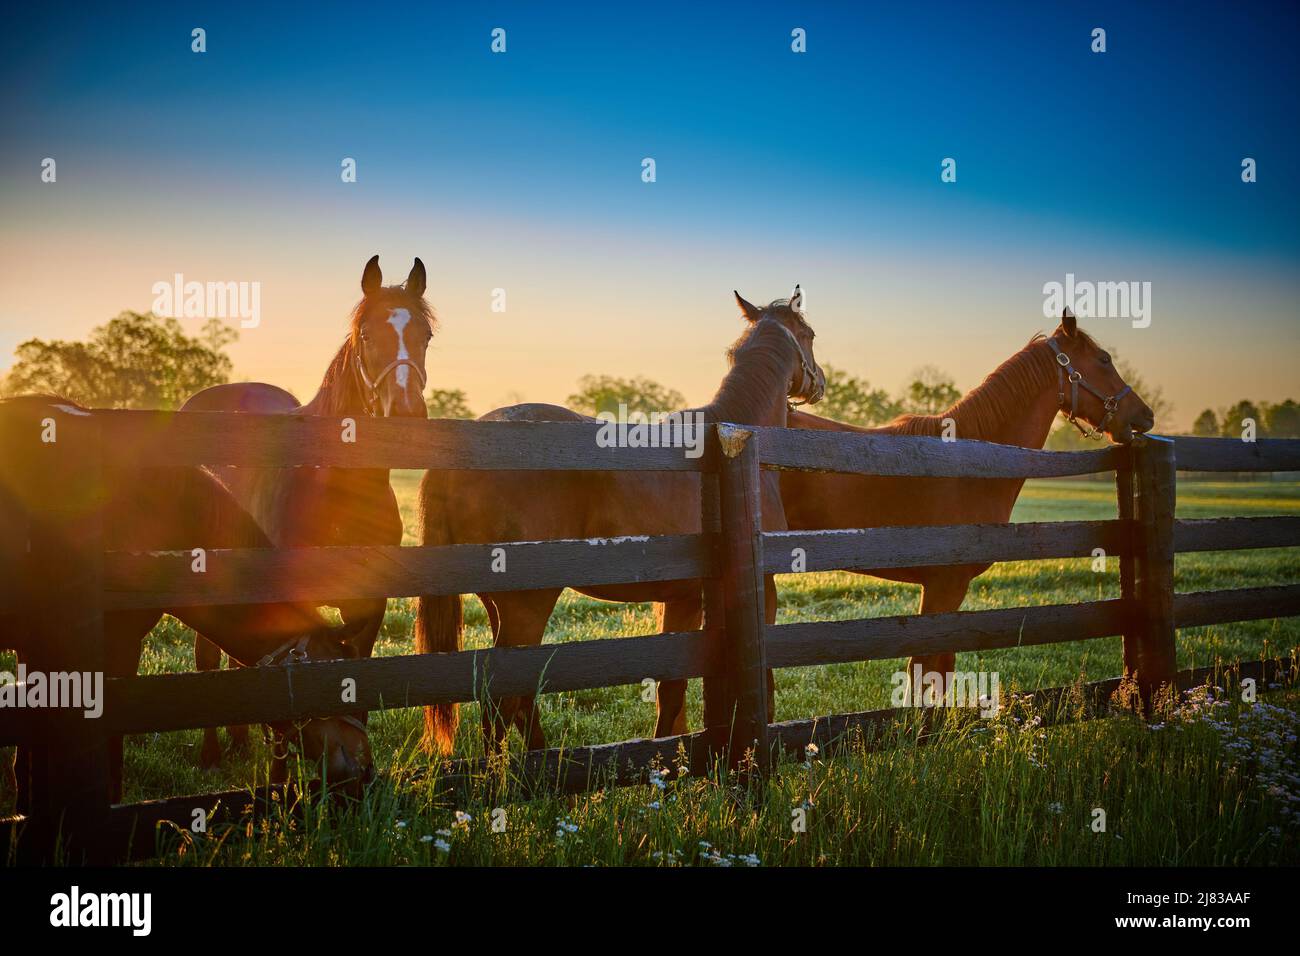 Group of horses standing along wooden fence with sun flare. Stock Photo